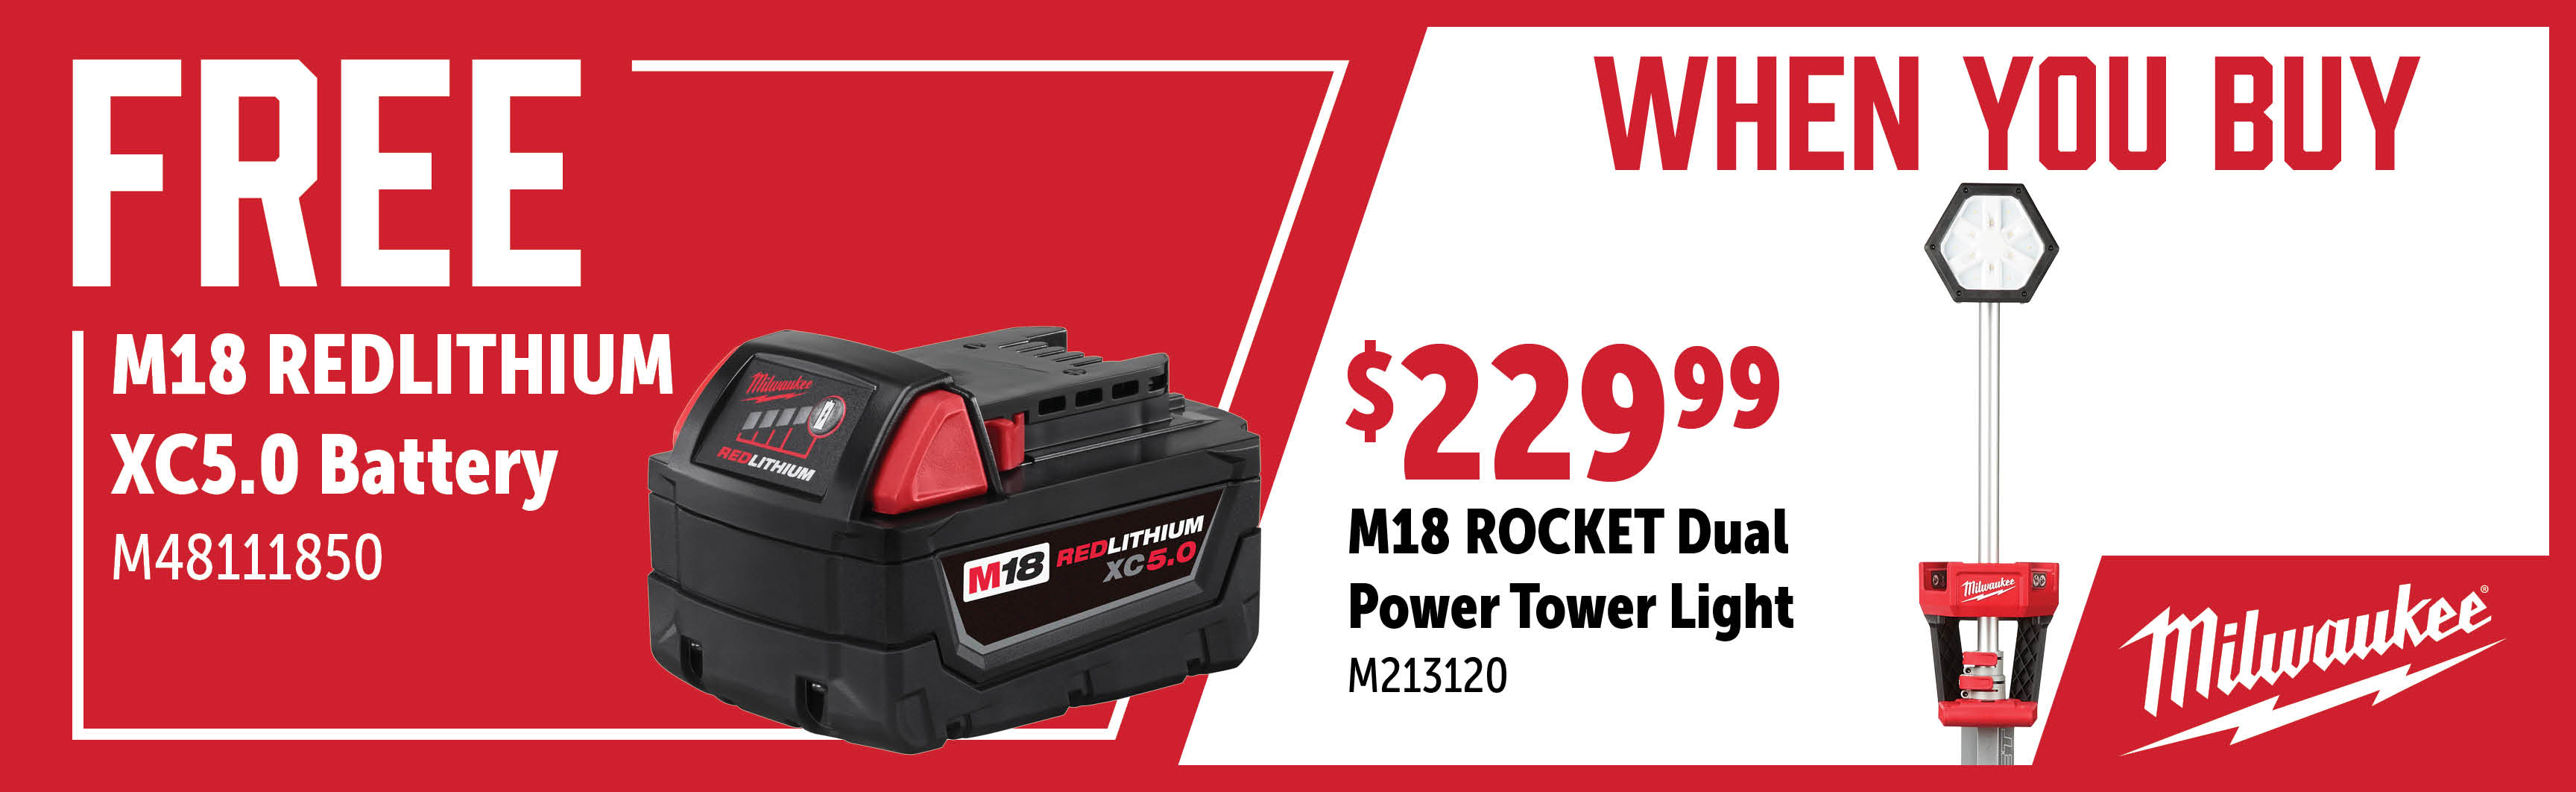 Milwaukee May - July: Buy a M213120 Tower Light and get a FREE M48111850 Battery